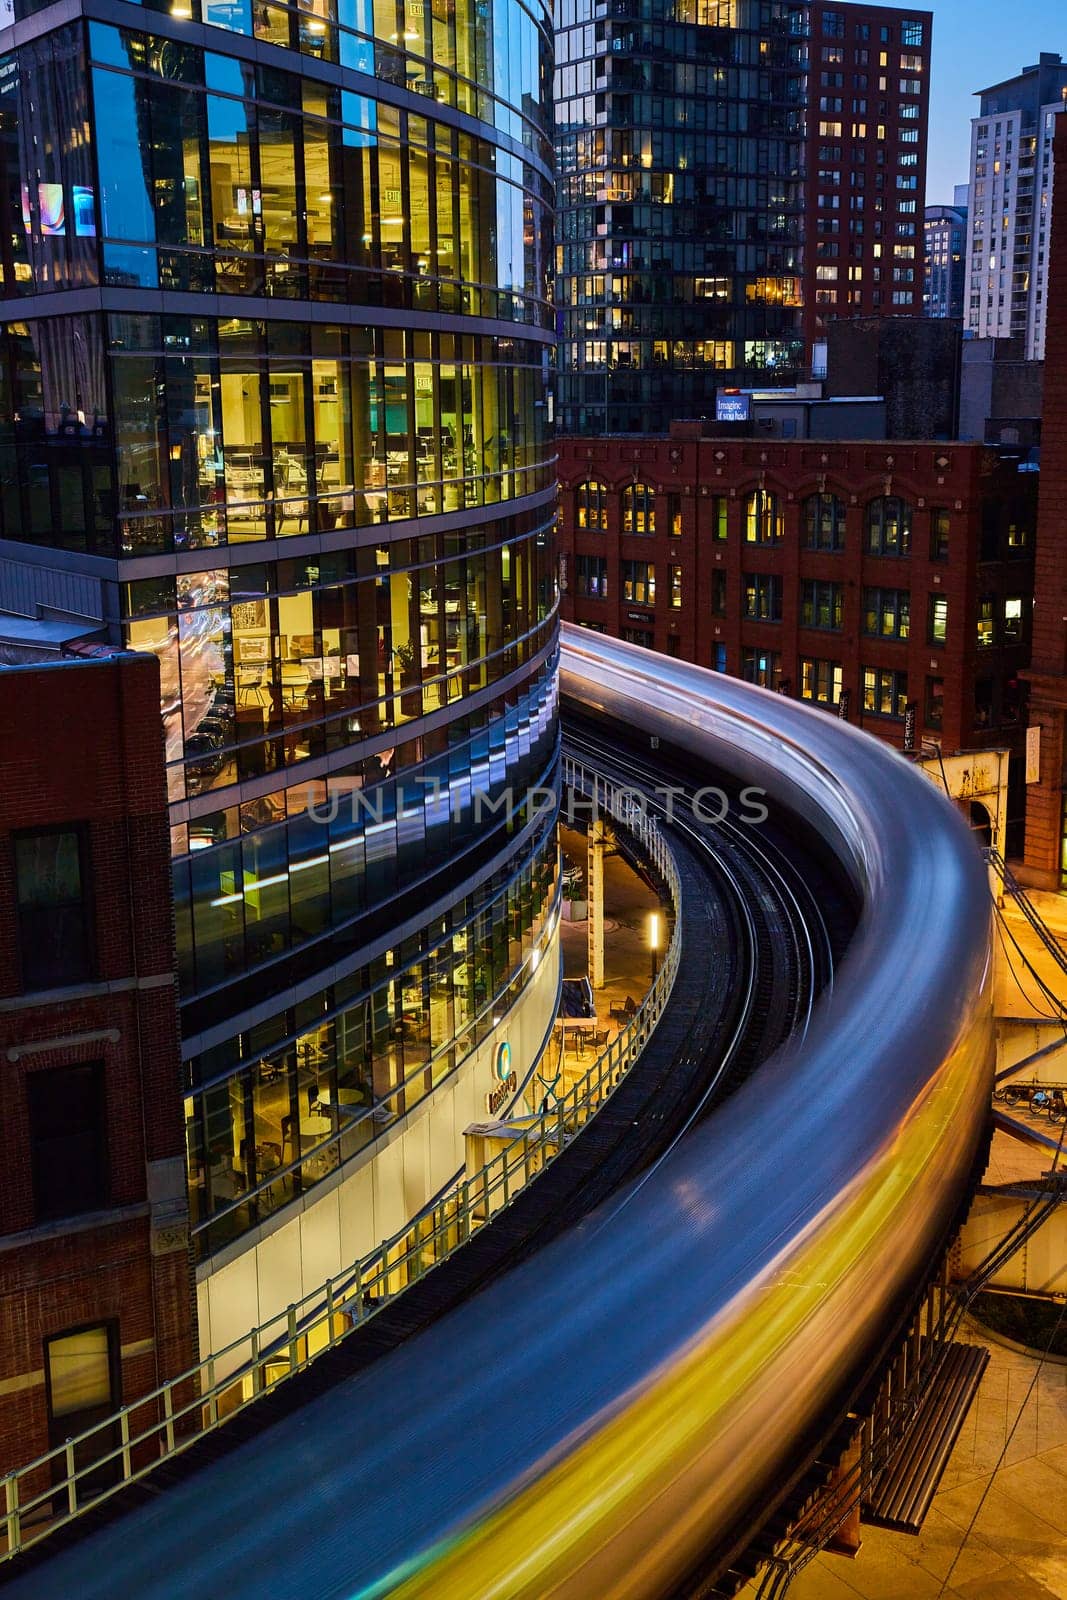 Blurred Train Motion and Urban Architecture at Dusk, Elevated View by njproductions